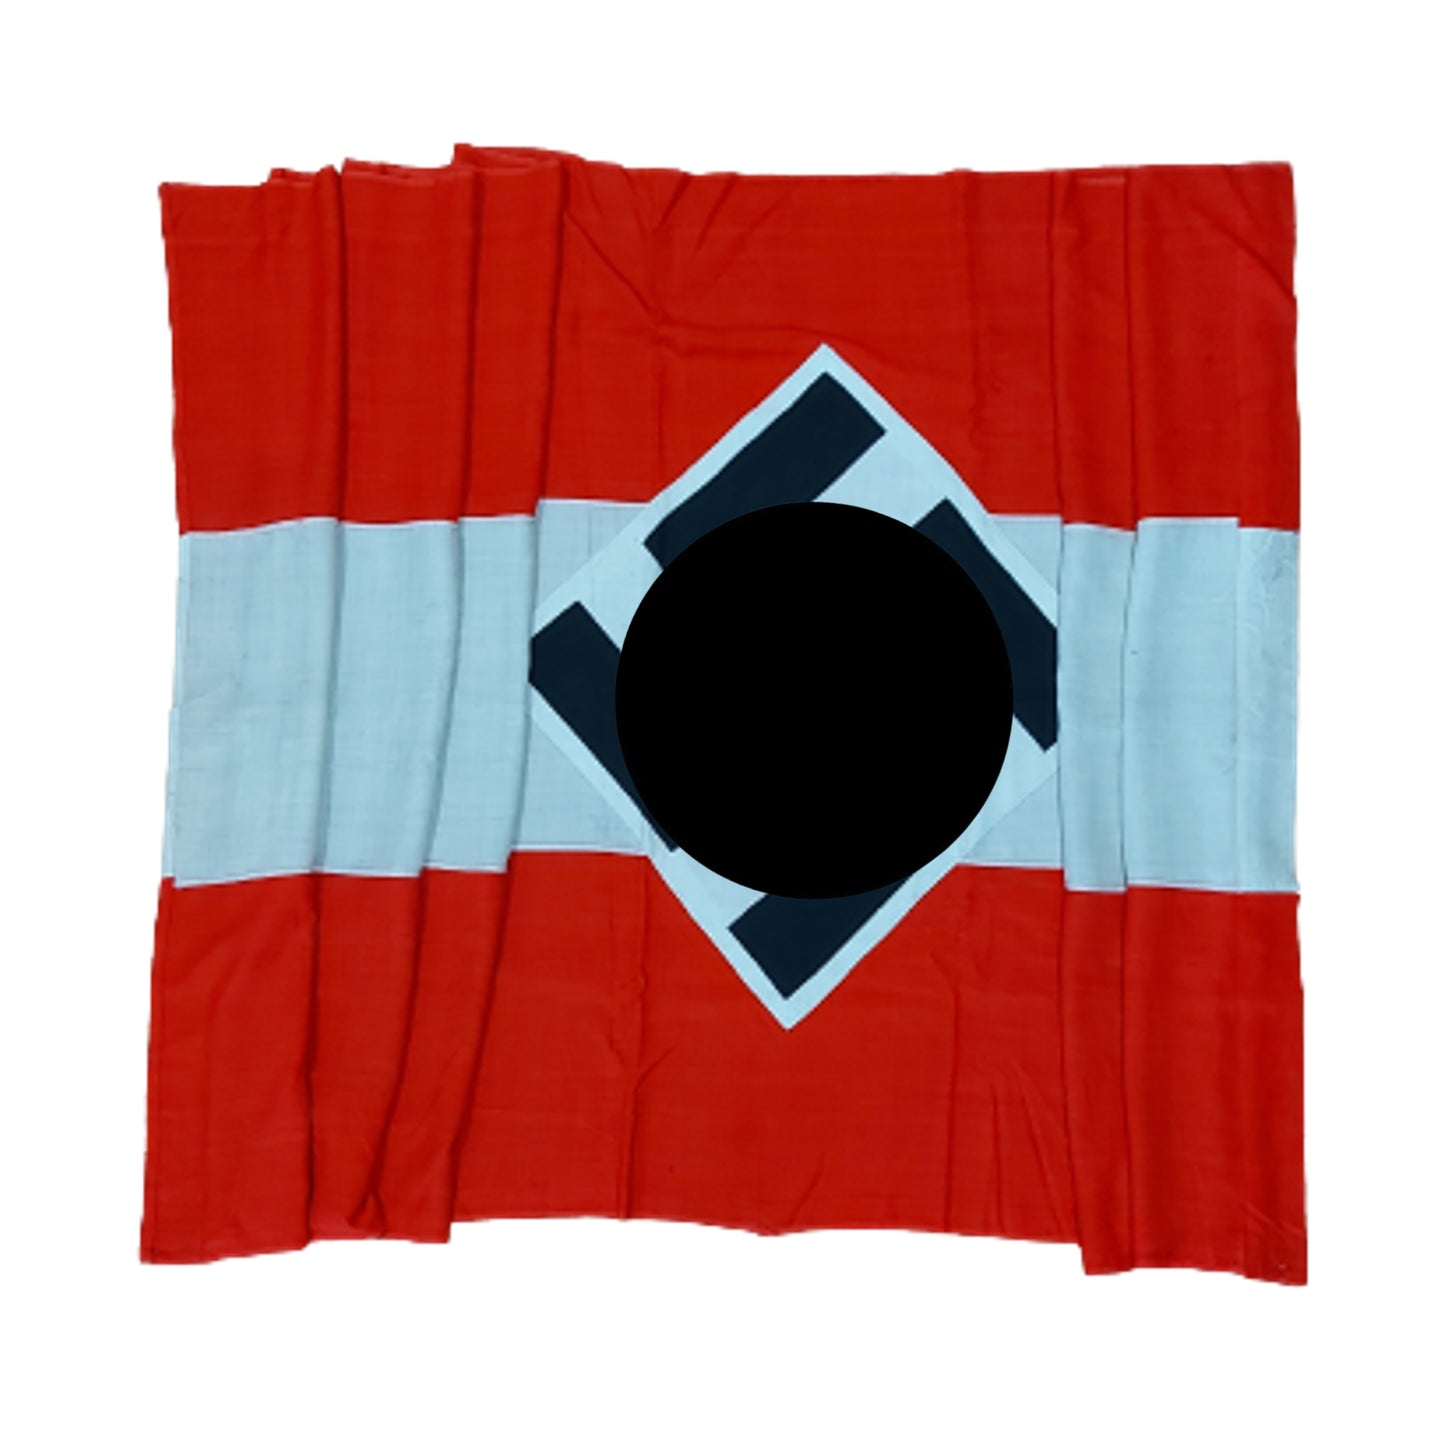 WW2 German HJ Hitler Youth Flag  110 x 46 Inches